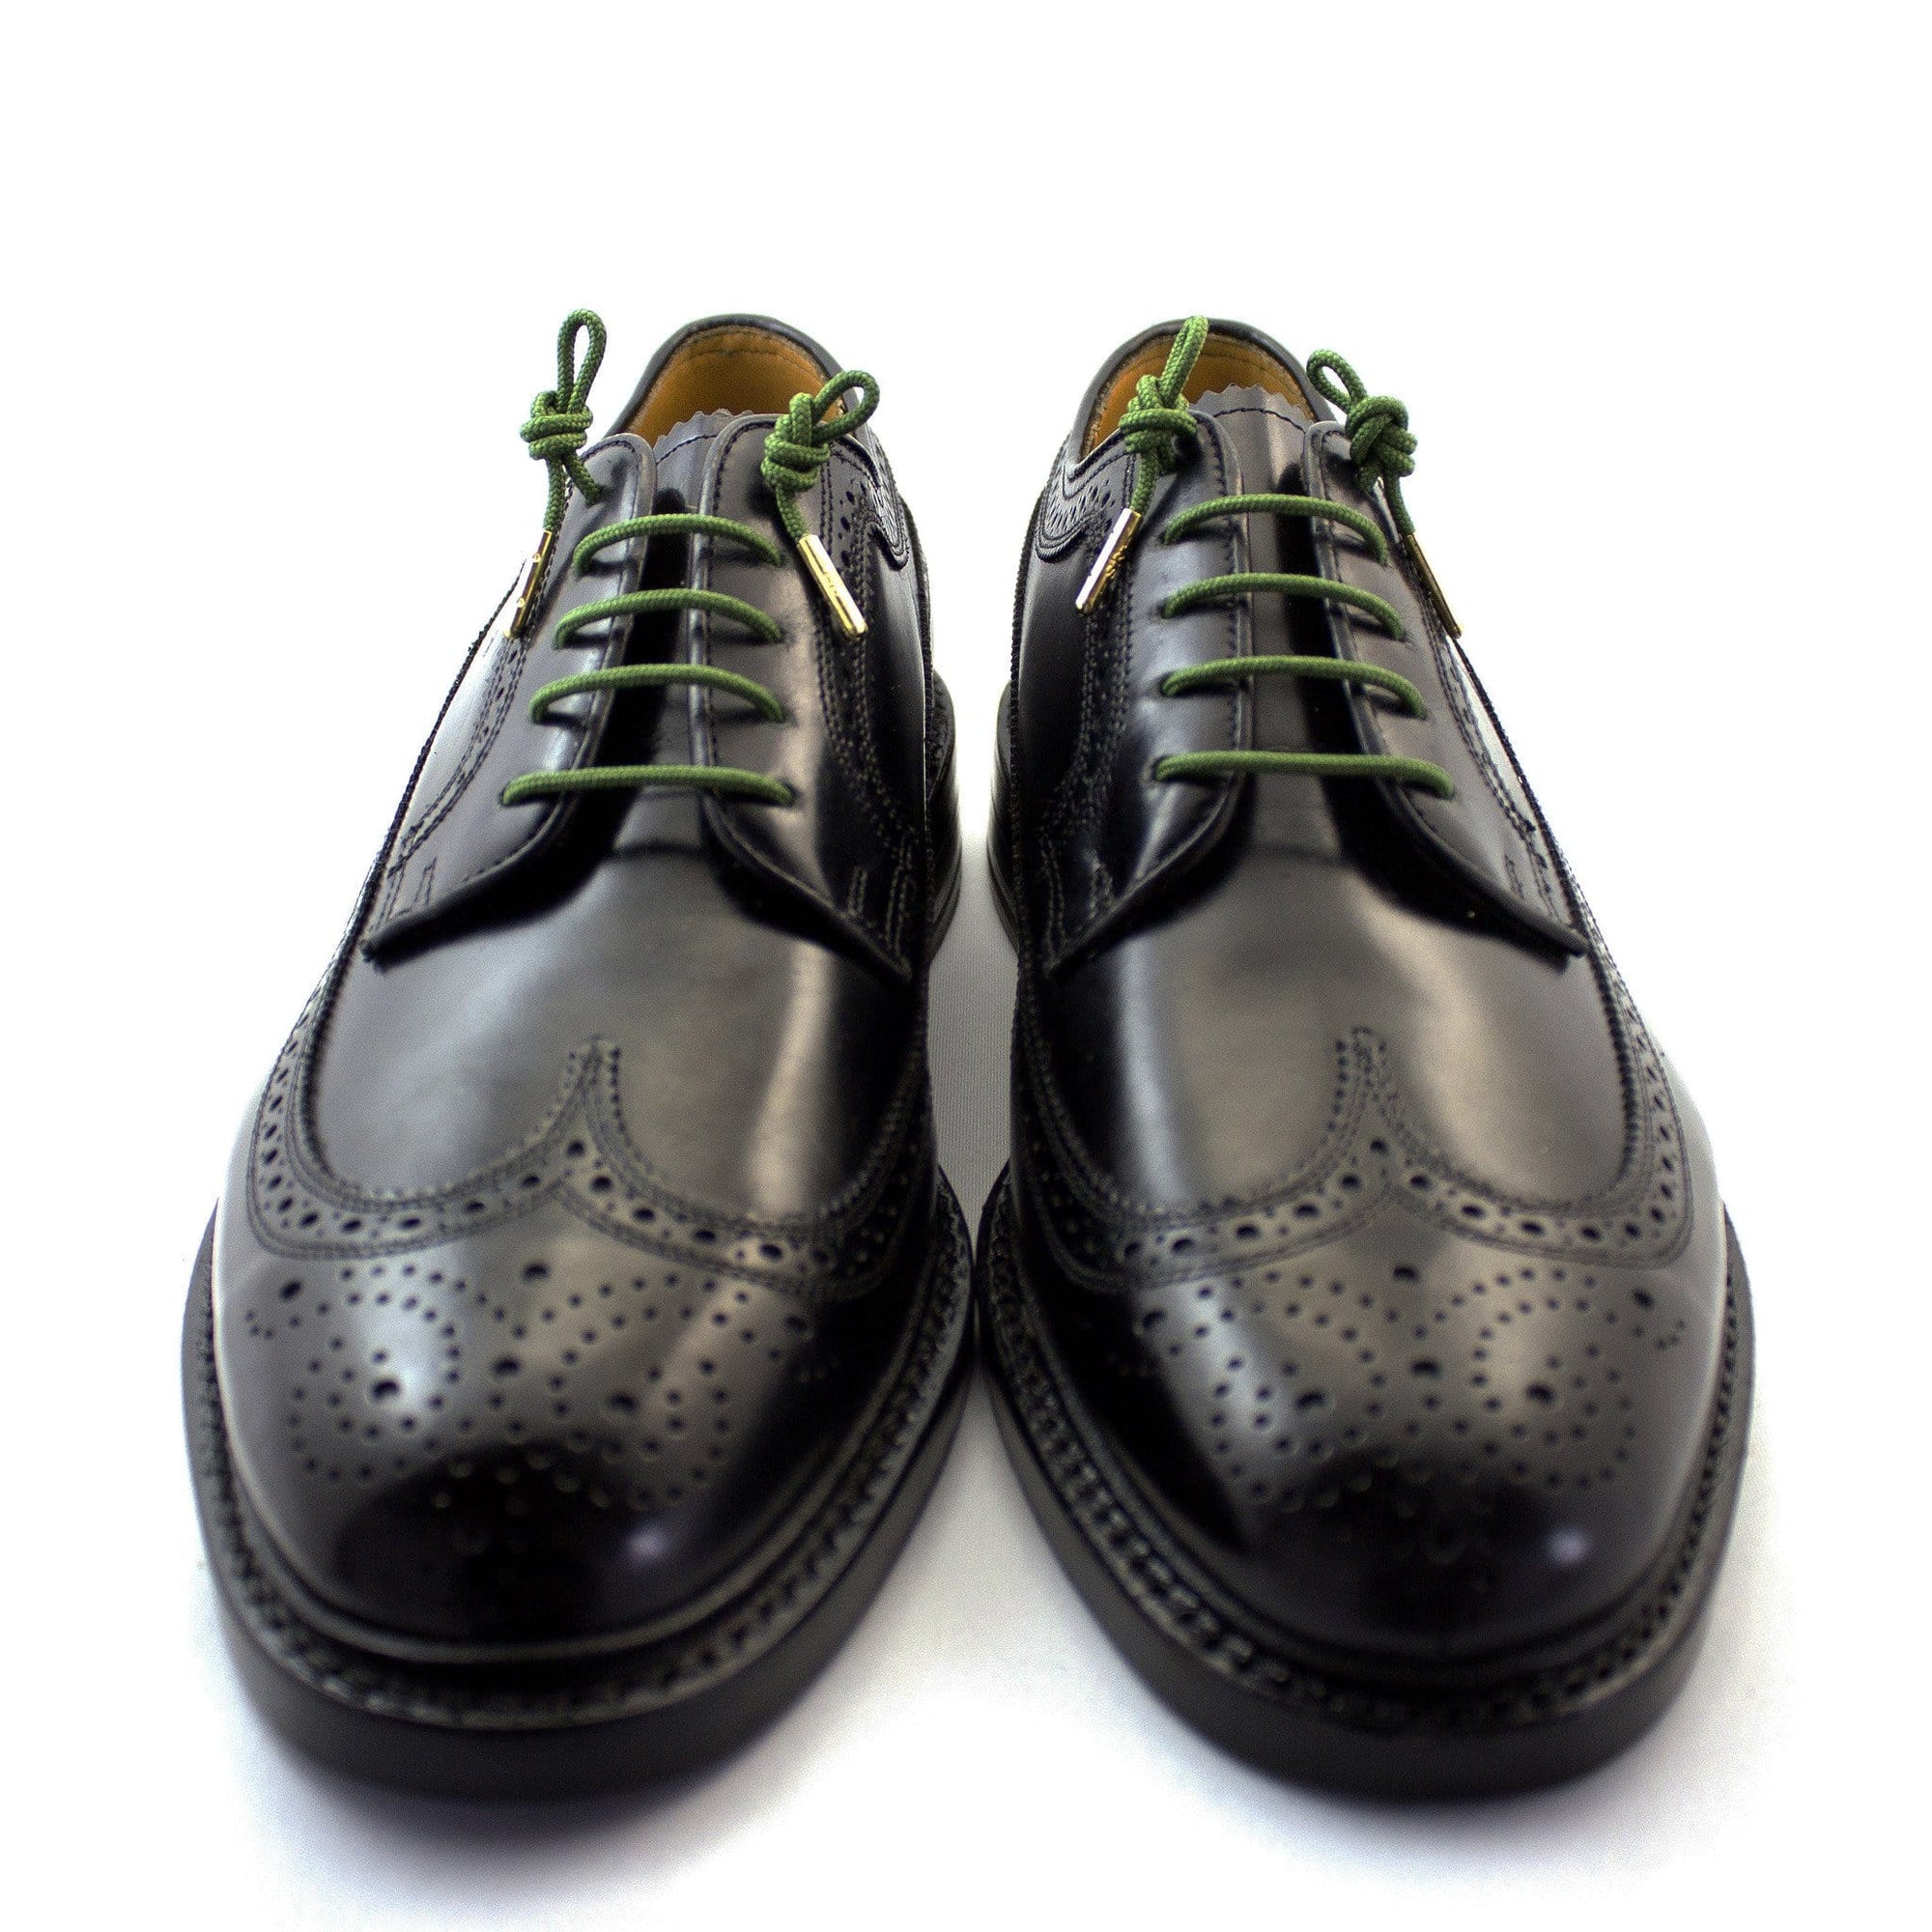 Army green laces for dress shoes, Length: 27"/69cm-Stolen Riches